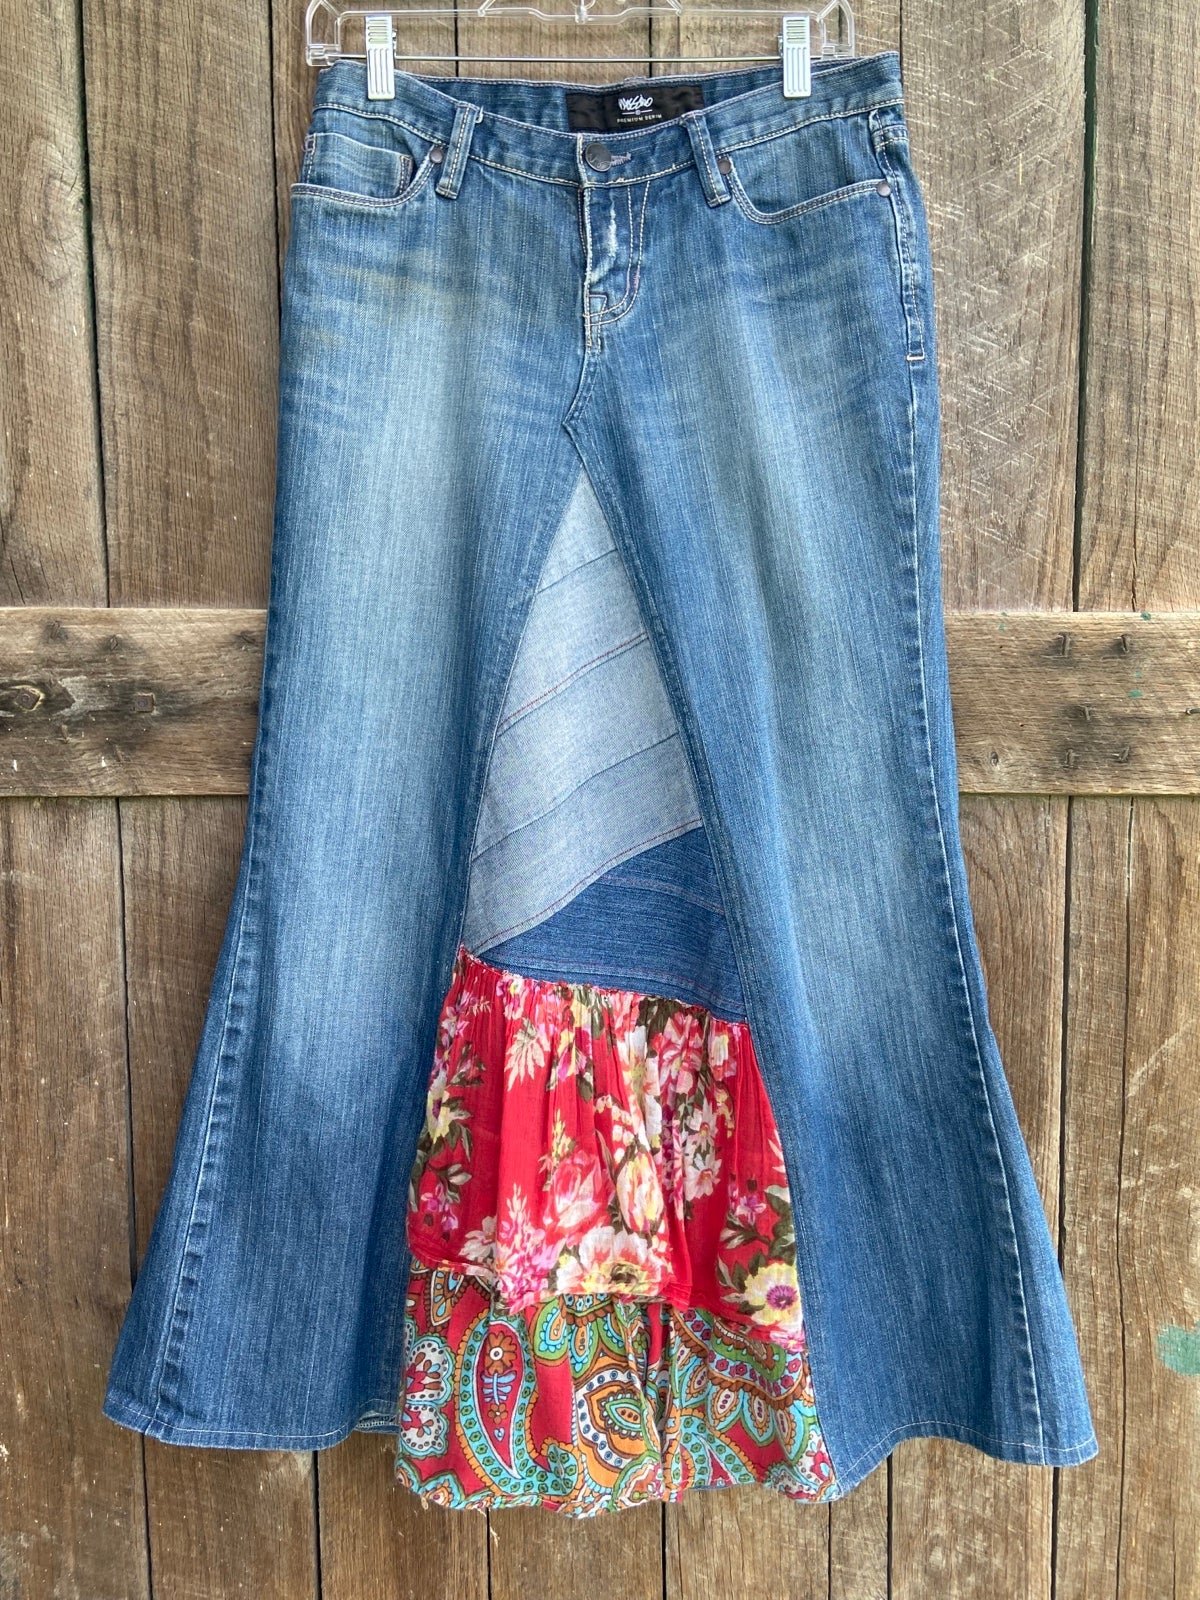 good price Boho Western Women’s Denim Skirt w/ Red Ruffles size 4 nlFSMd4IL Outlet Store